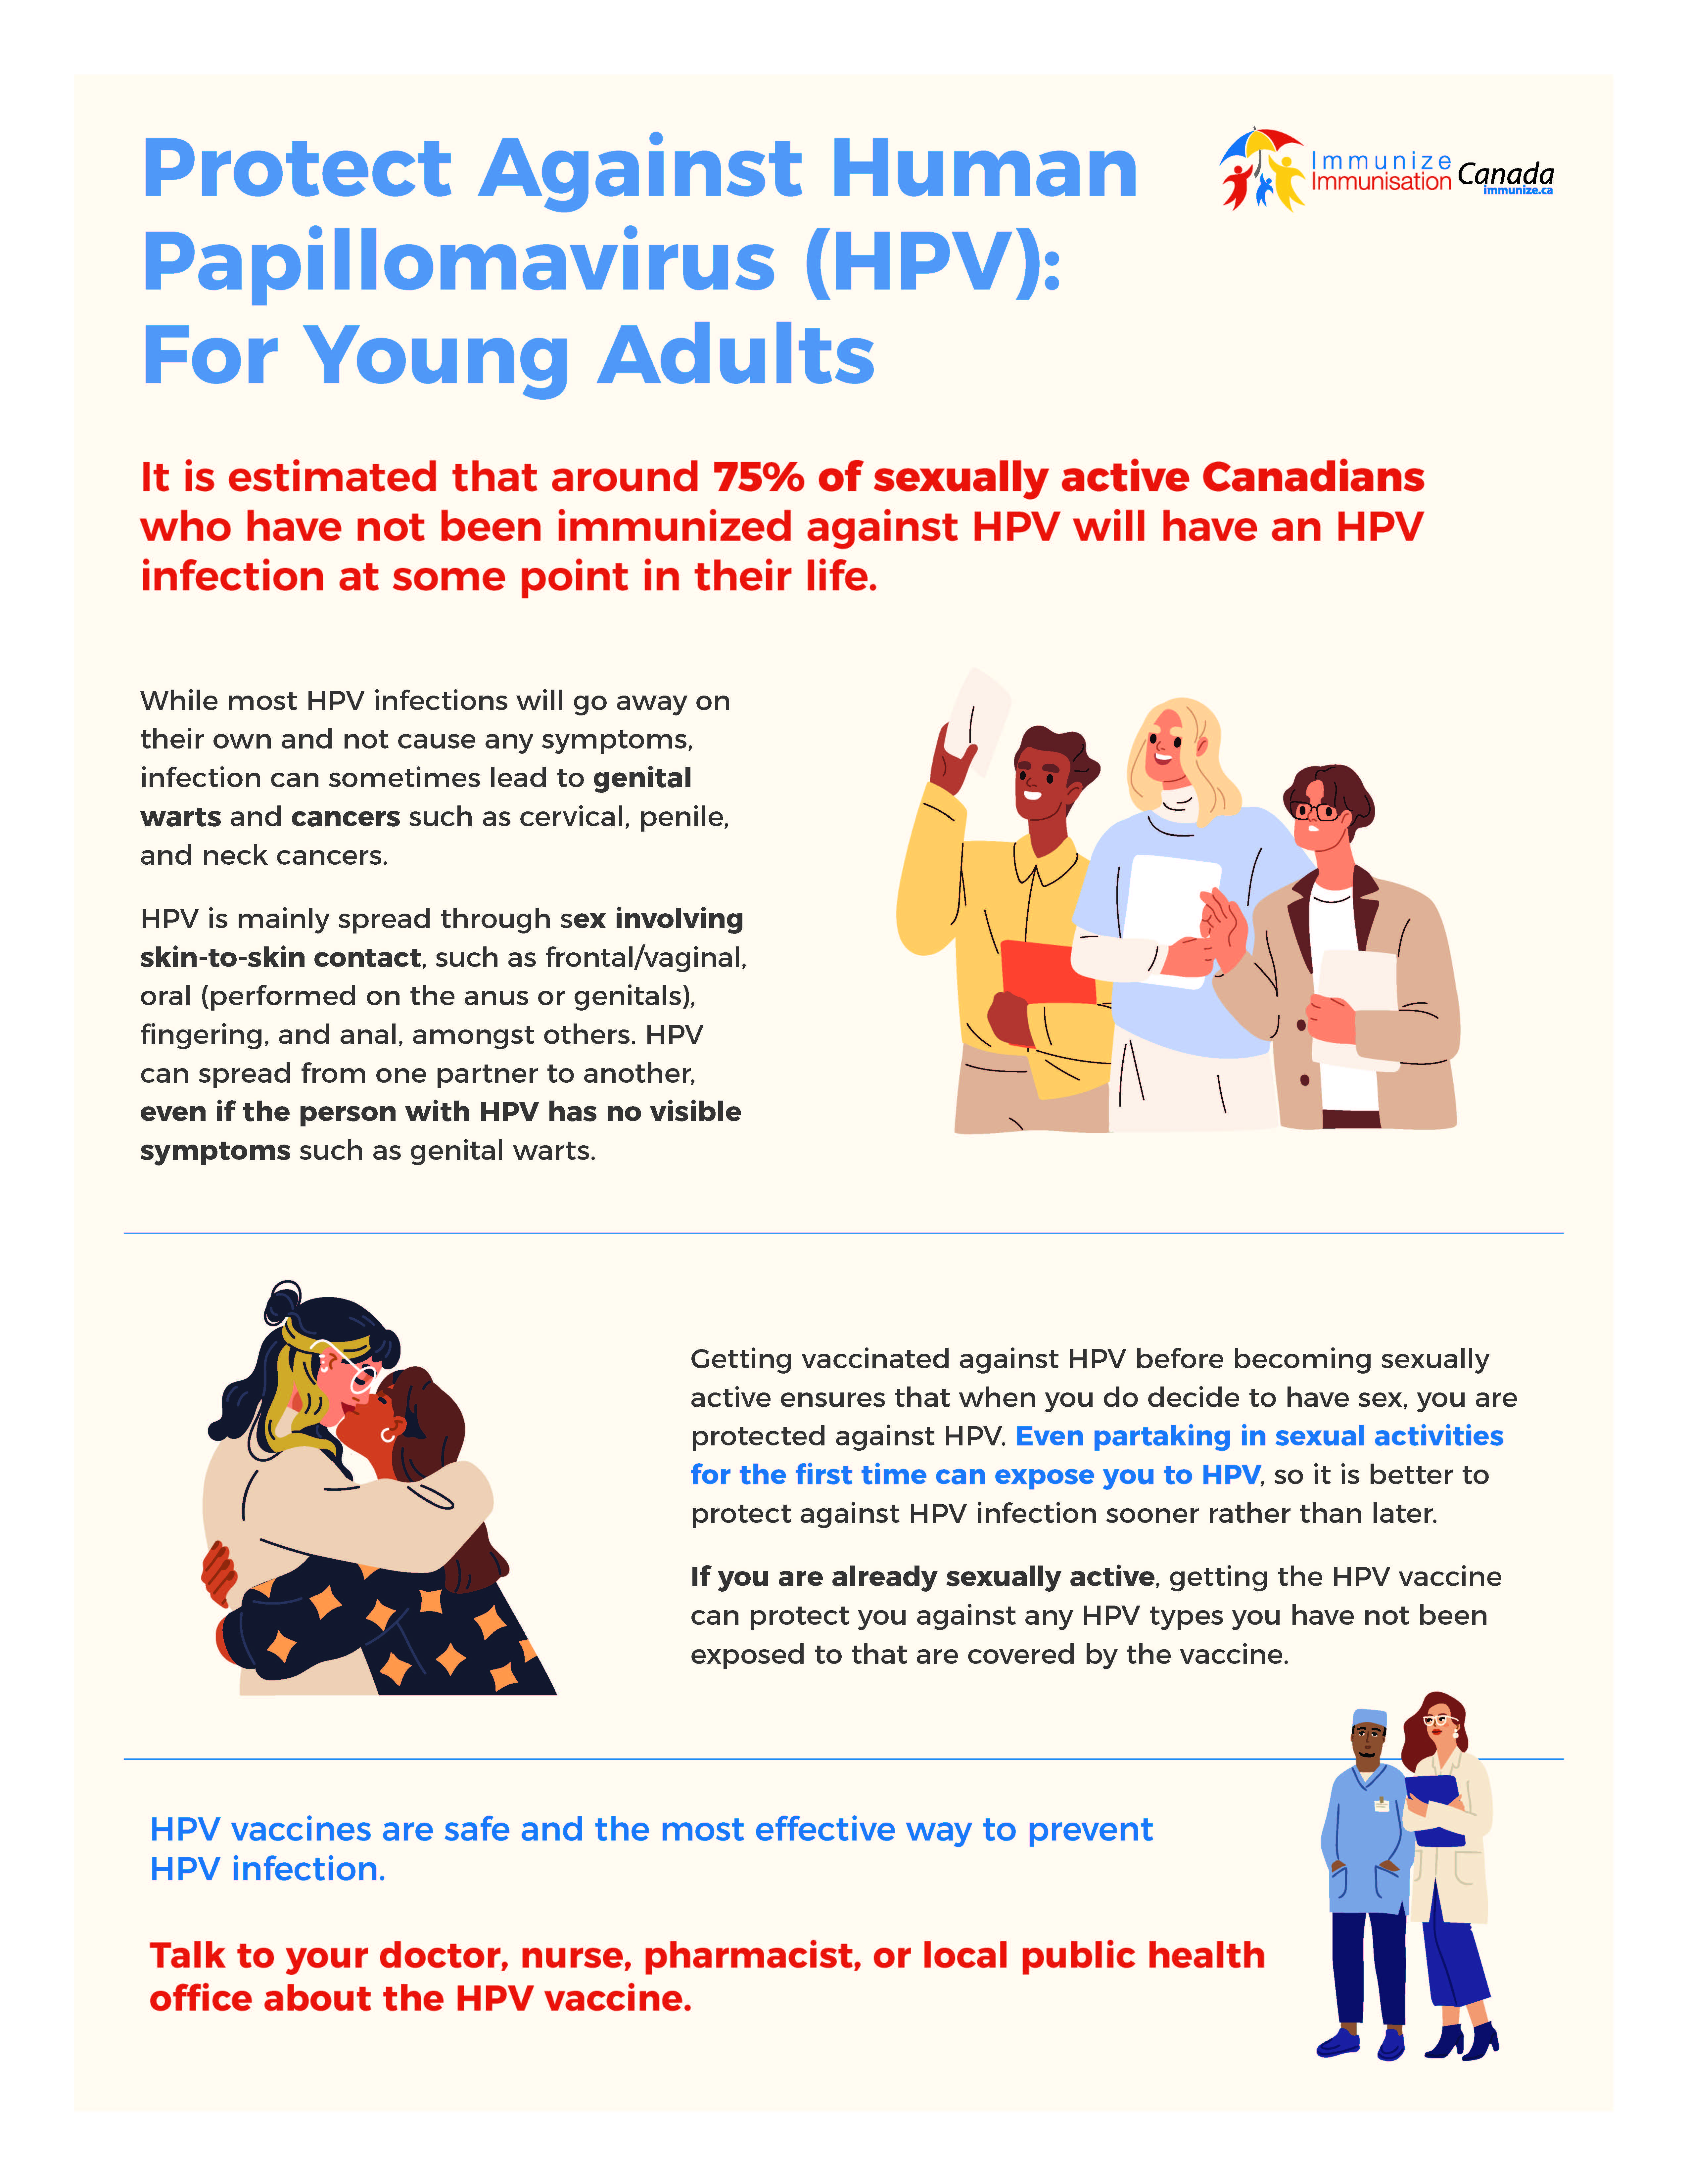 Protect Against Human Papillomavirus (HPV): For Young Adults